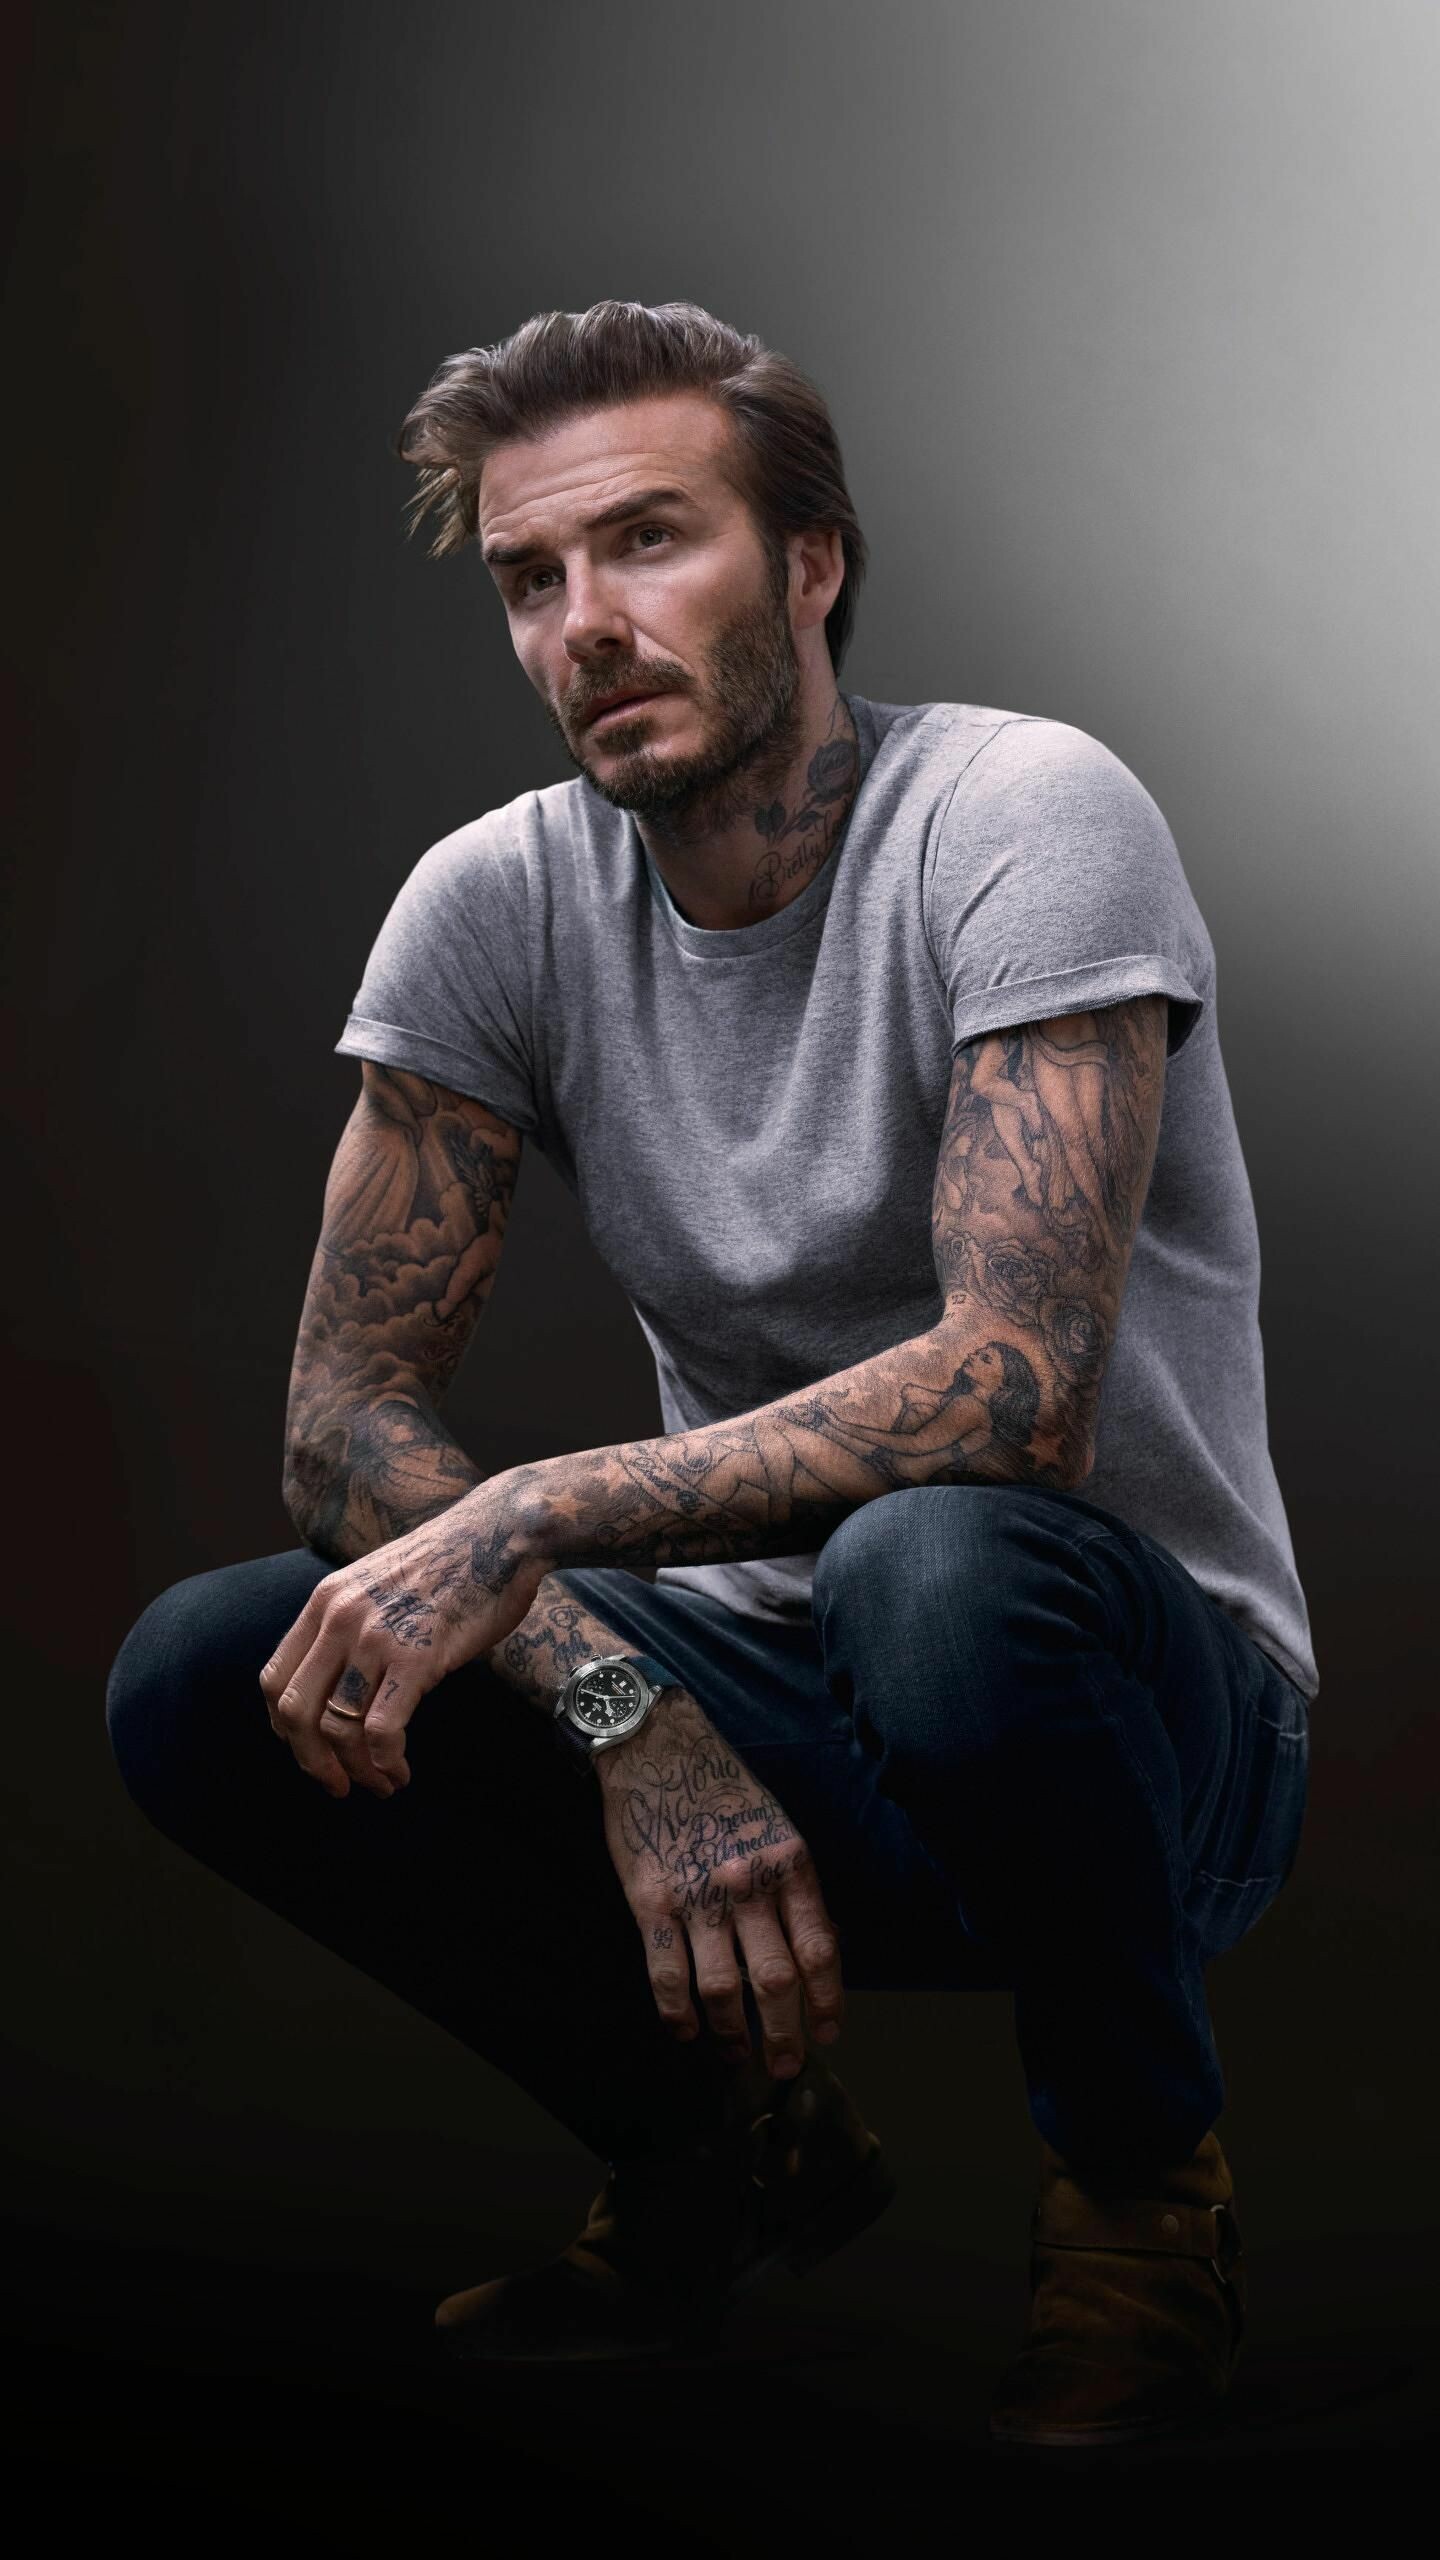 David Beckham: Sports, Twice runner-up for FIFA World Player of the Year (1999 and 2001). 1440x2560 HD Wallpaper.